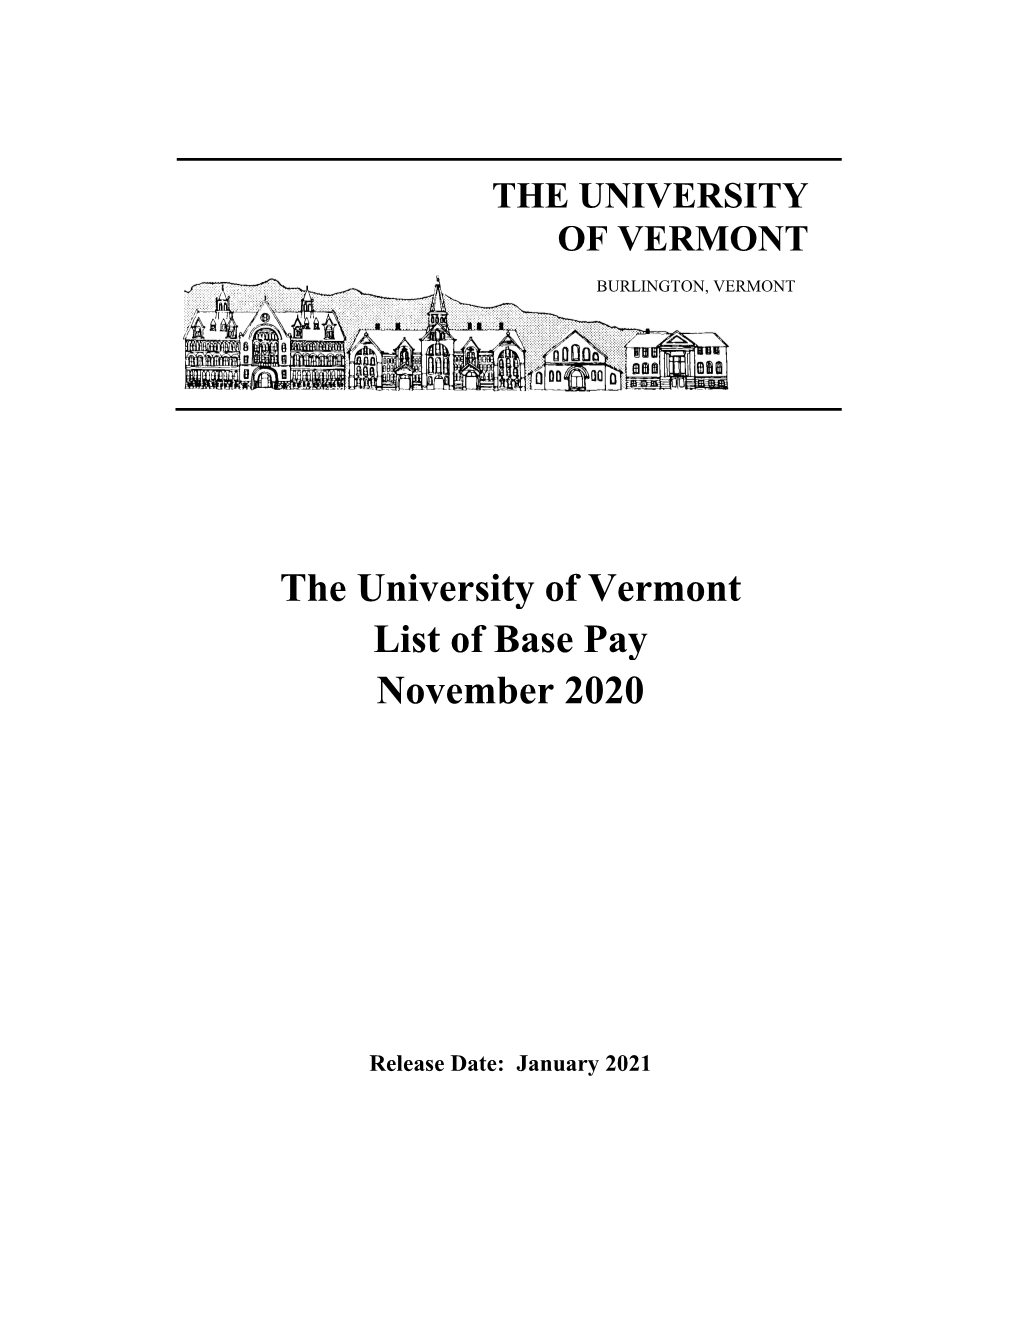 The University of Vermont List of Base Pay November 2020